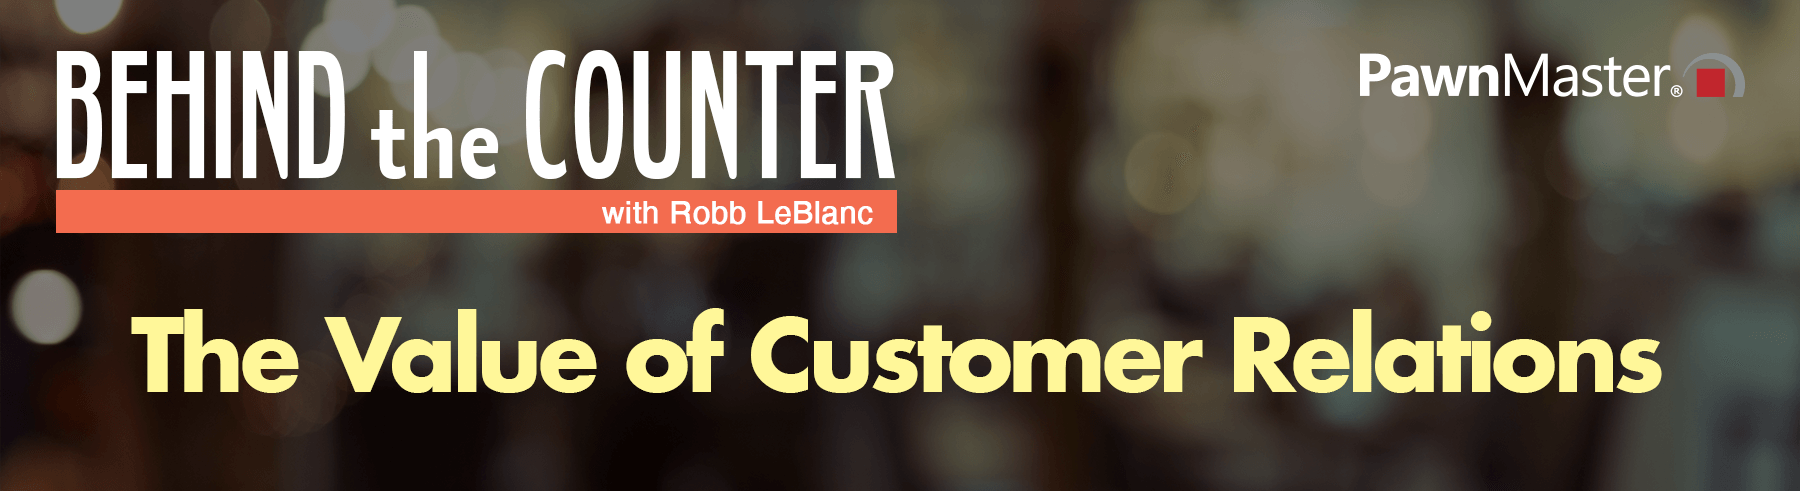 header-Behind the Counter-The Value of Customer Relations